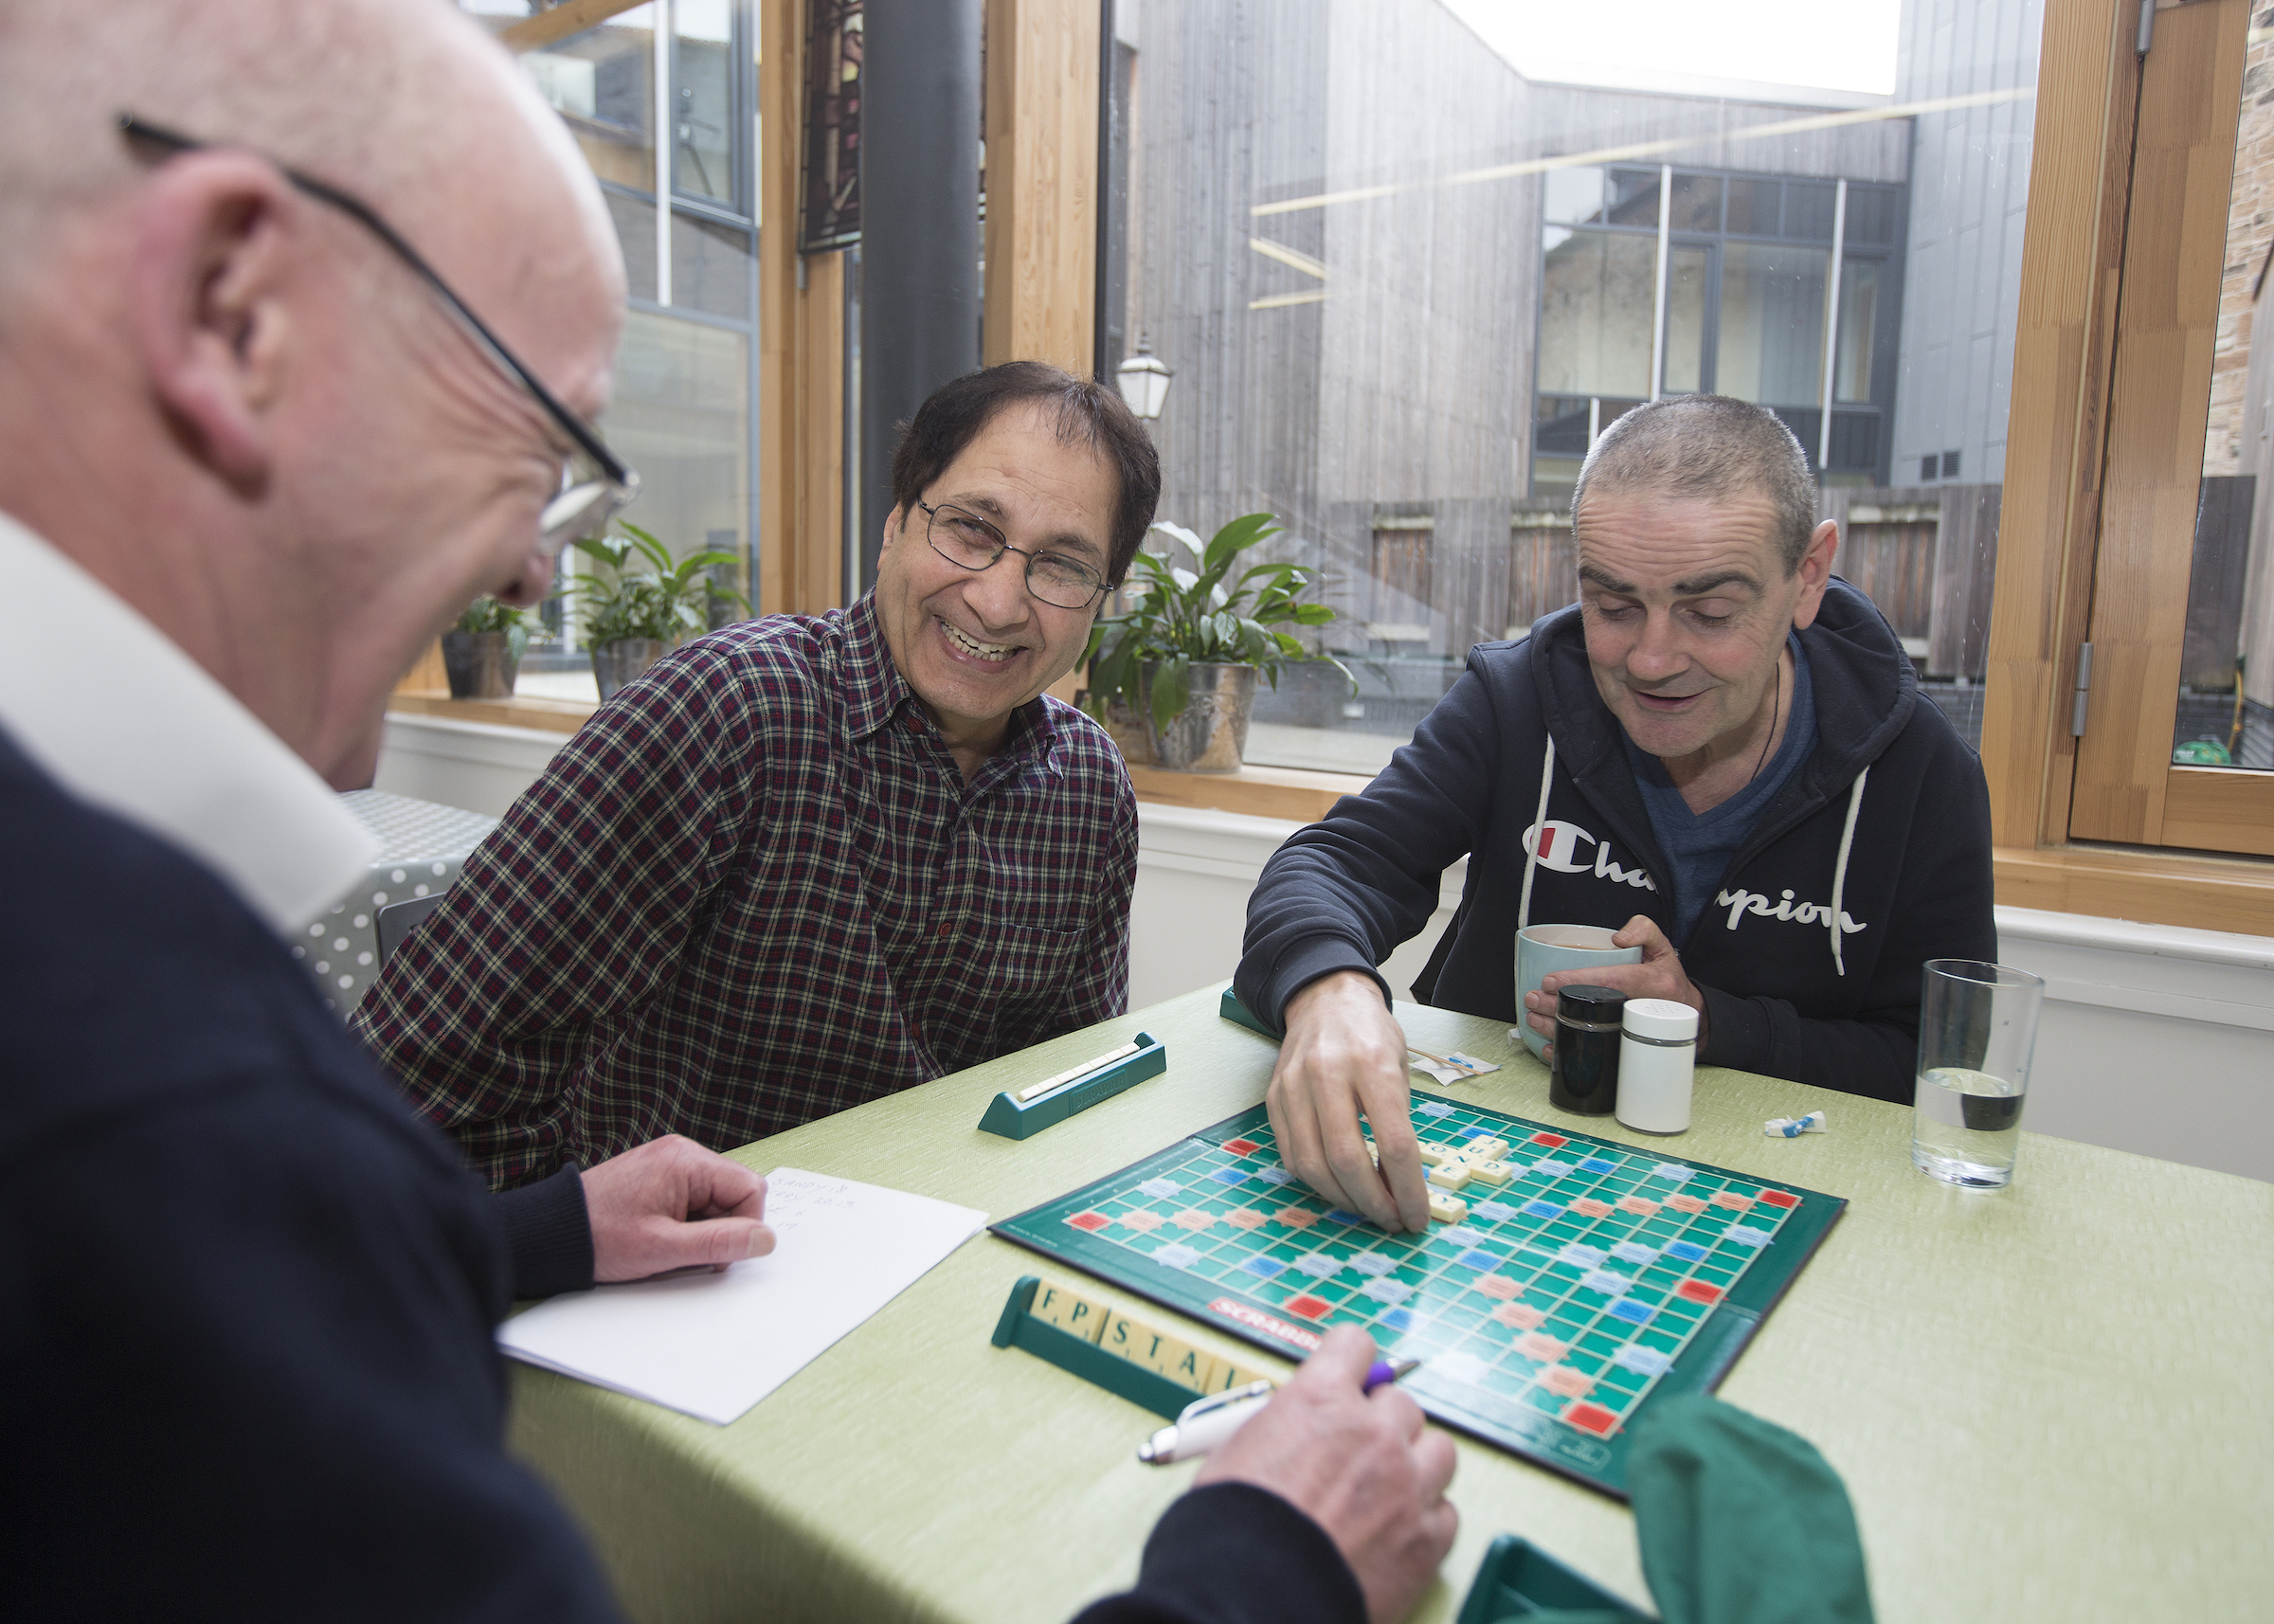 Drink Wise, Age Well staff and clients play a game of Scrabble